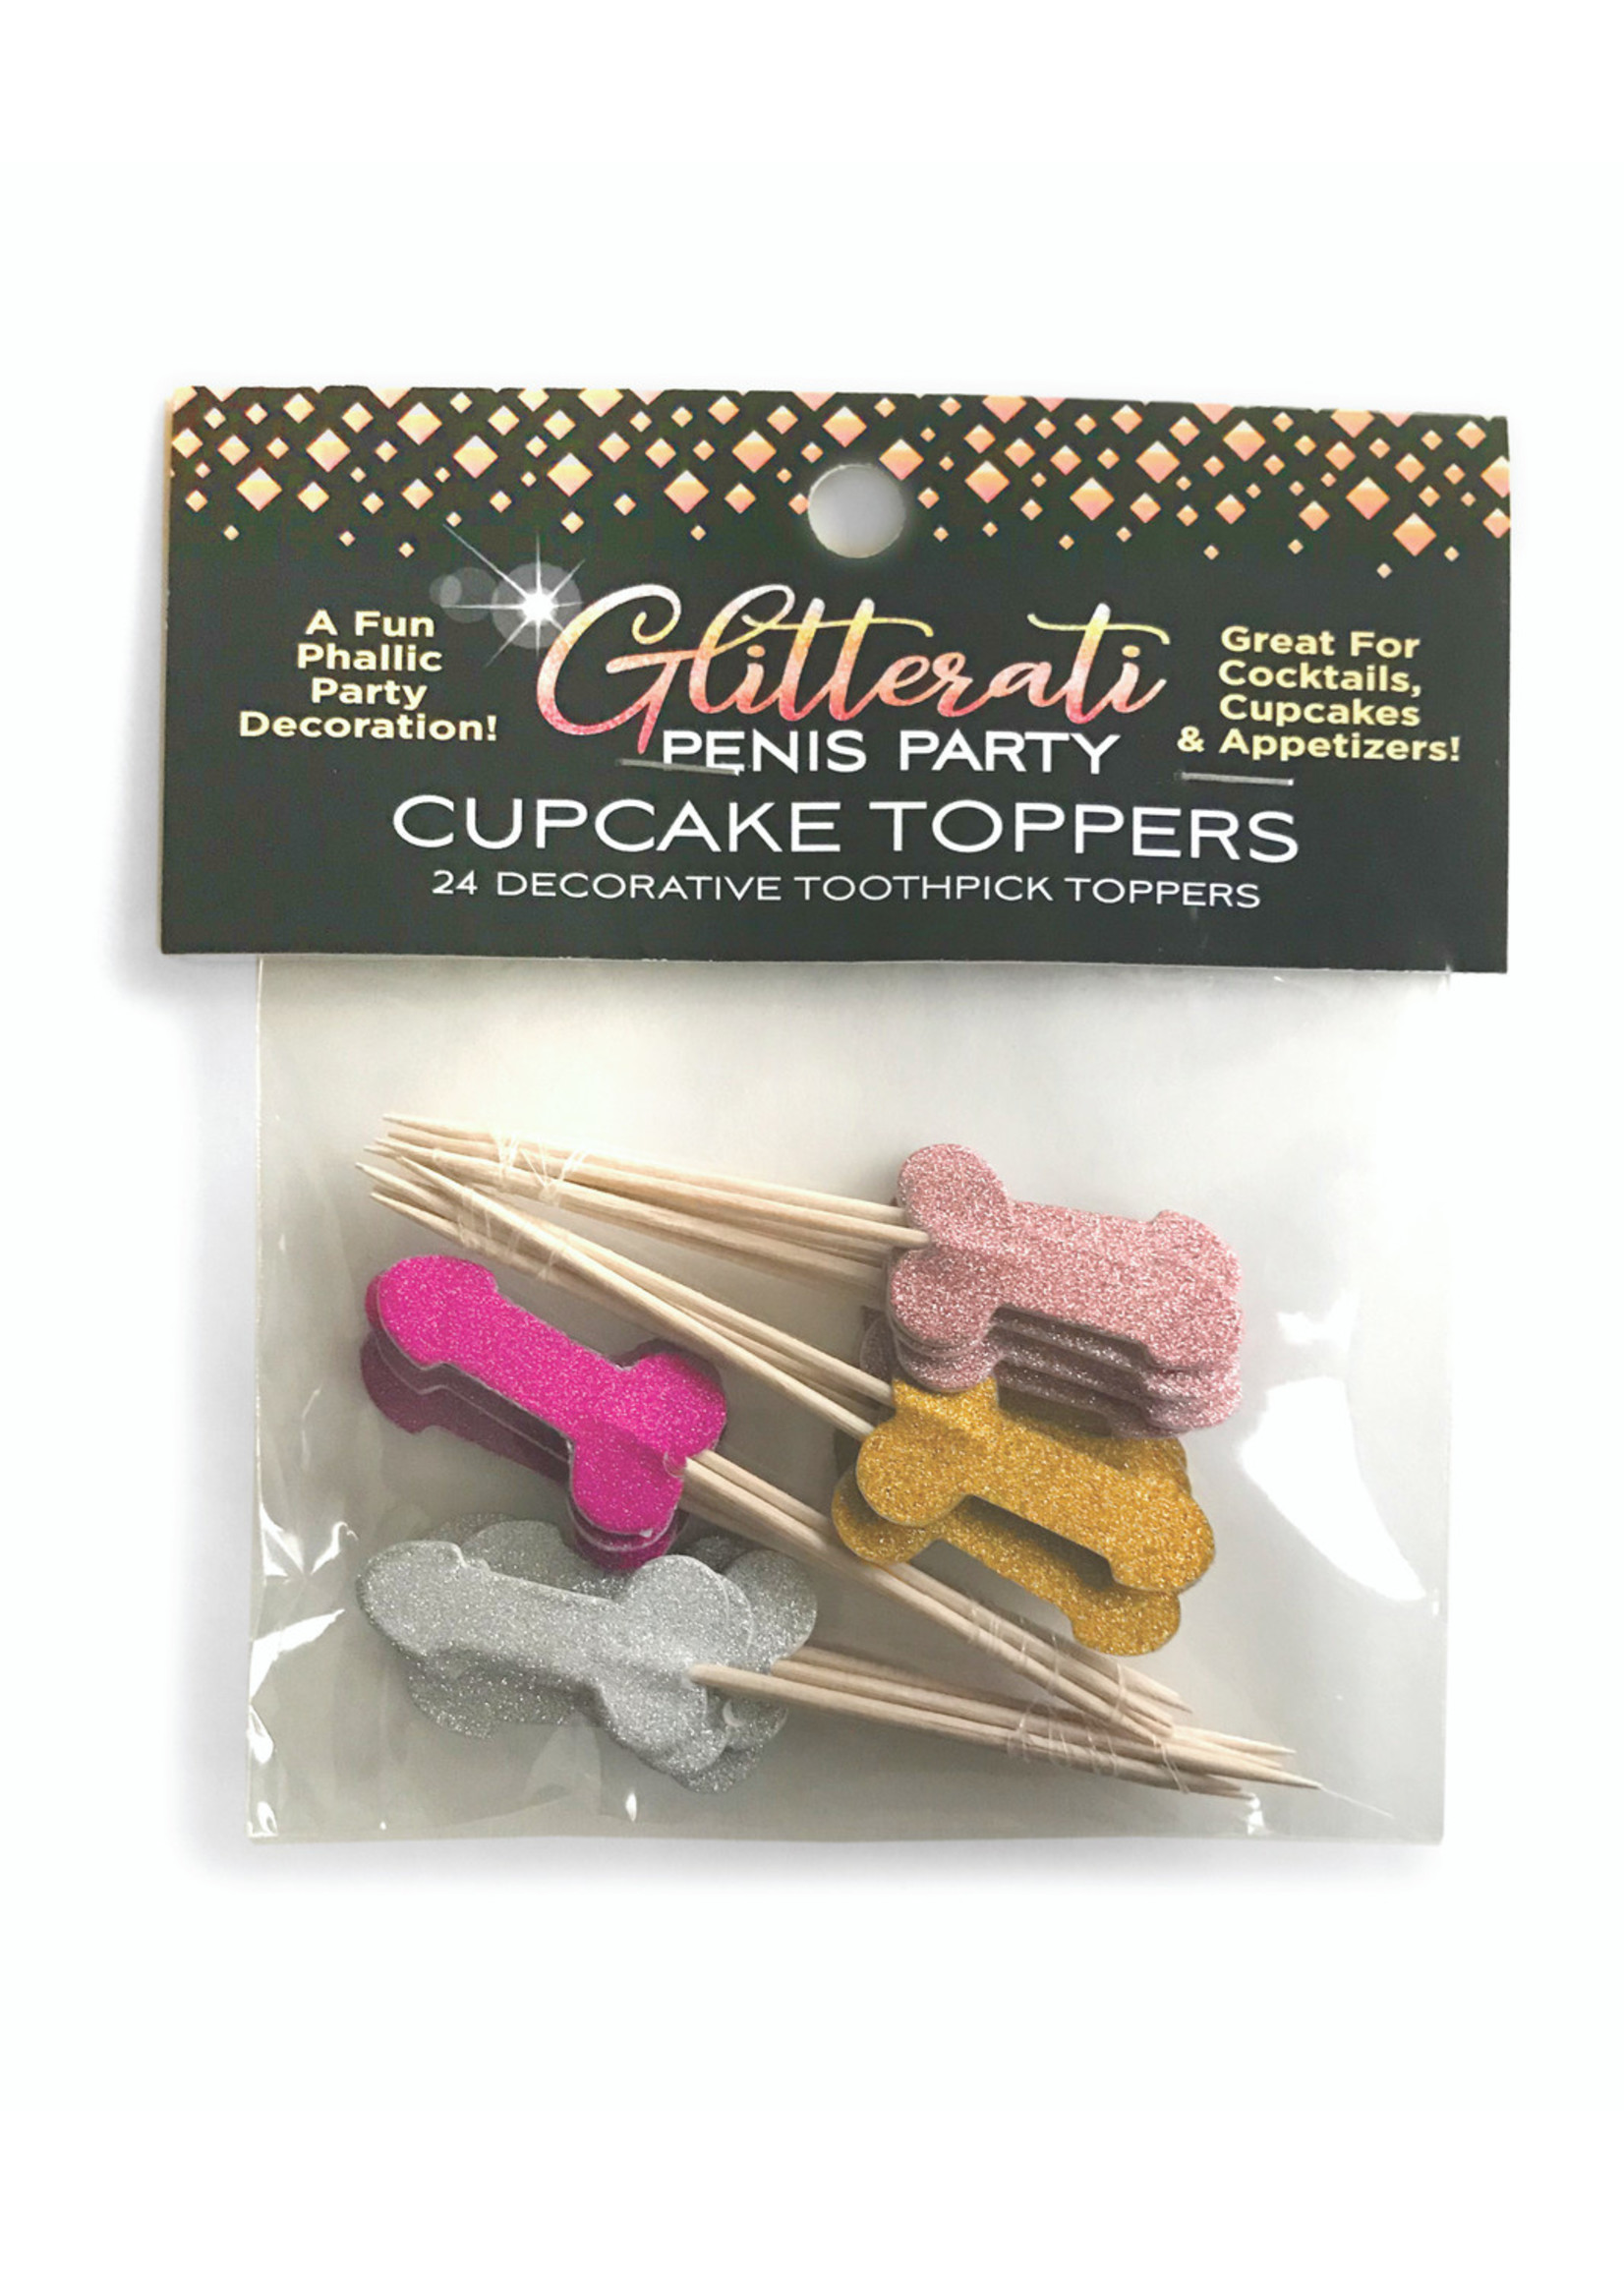 LITTLE GENIE Glitterati Penis Party Cupcake Toppers